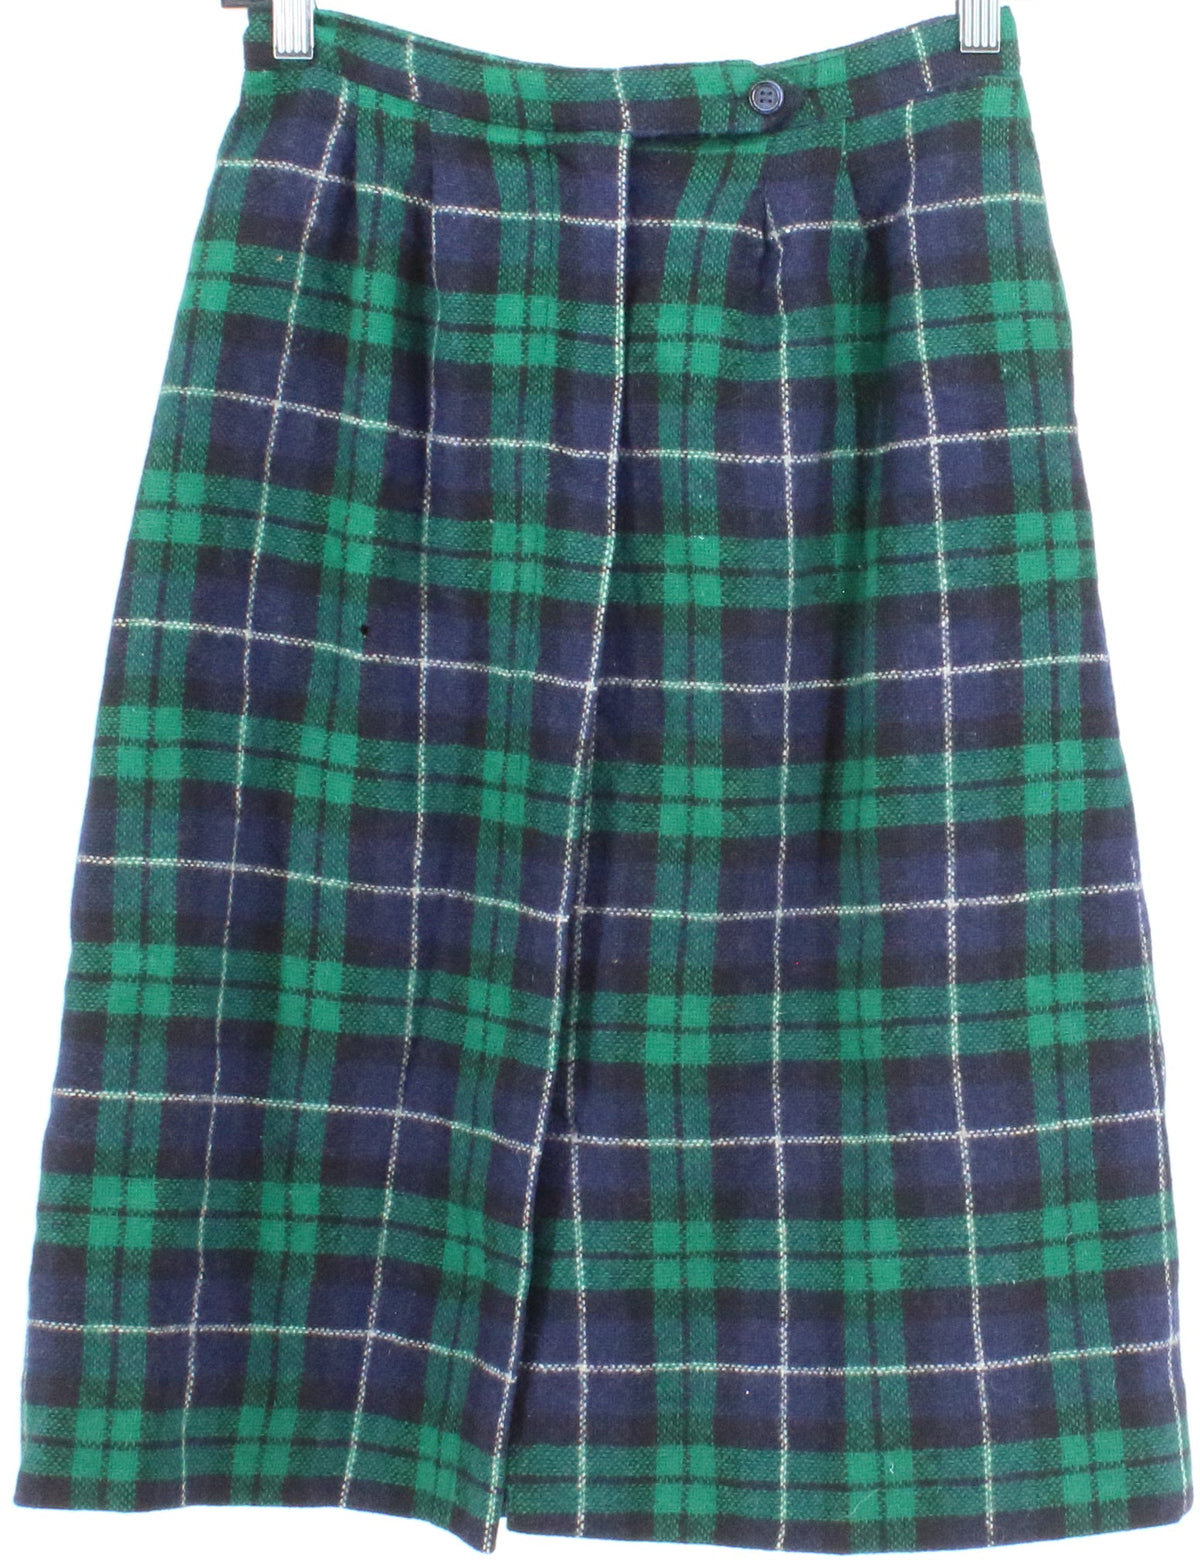 The Villager Navy Blue and Green Plaid Wool Skirt